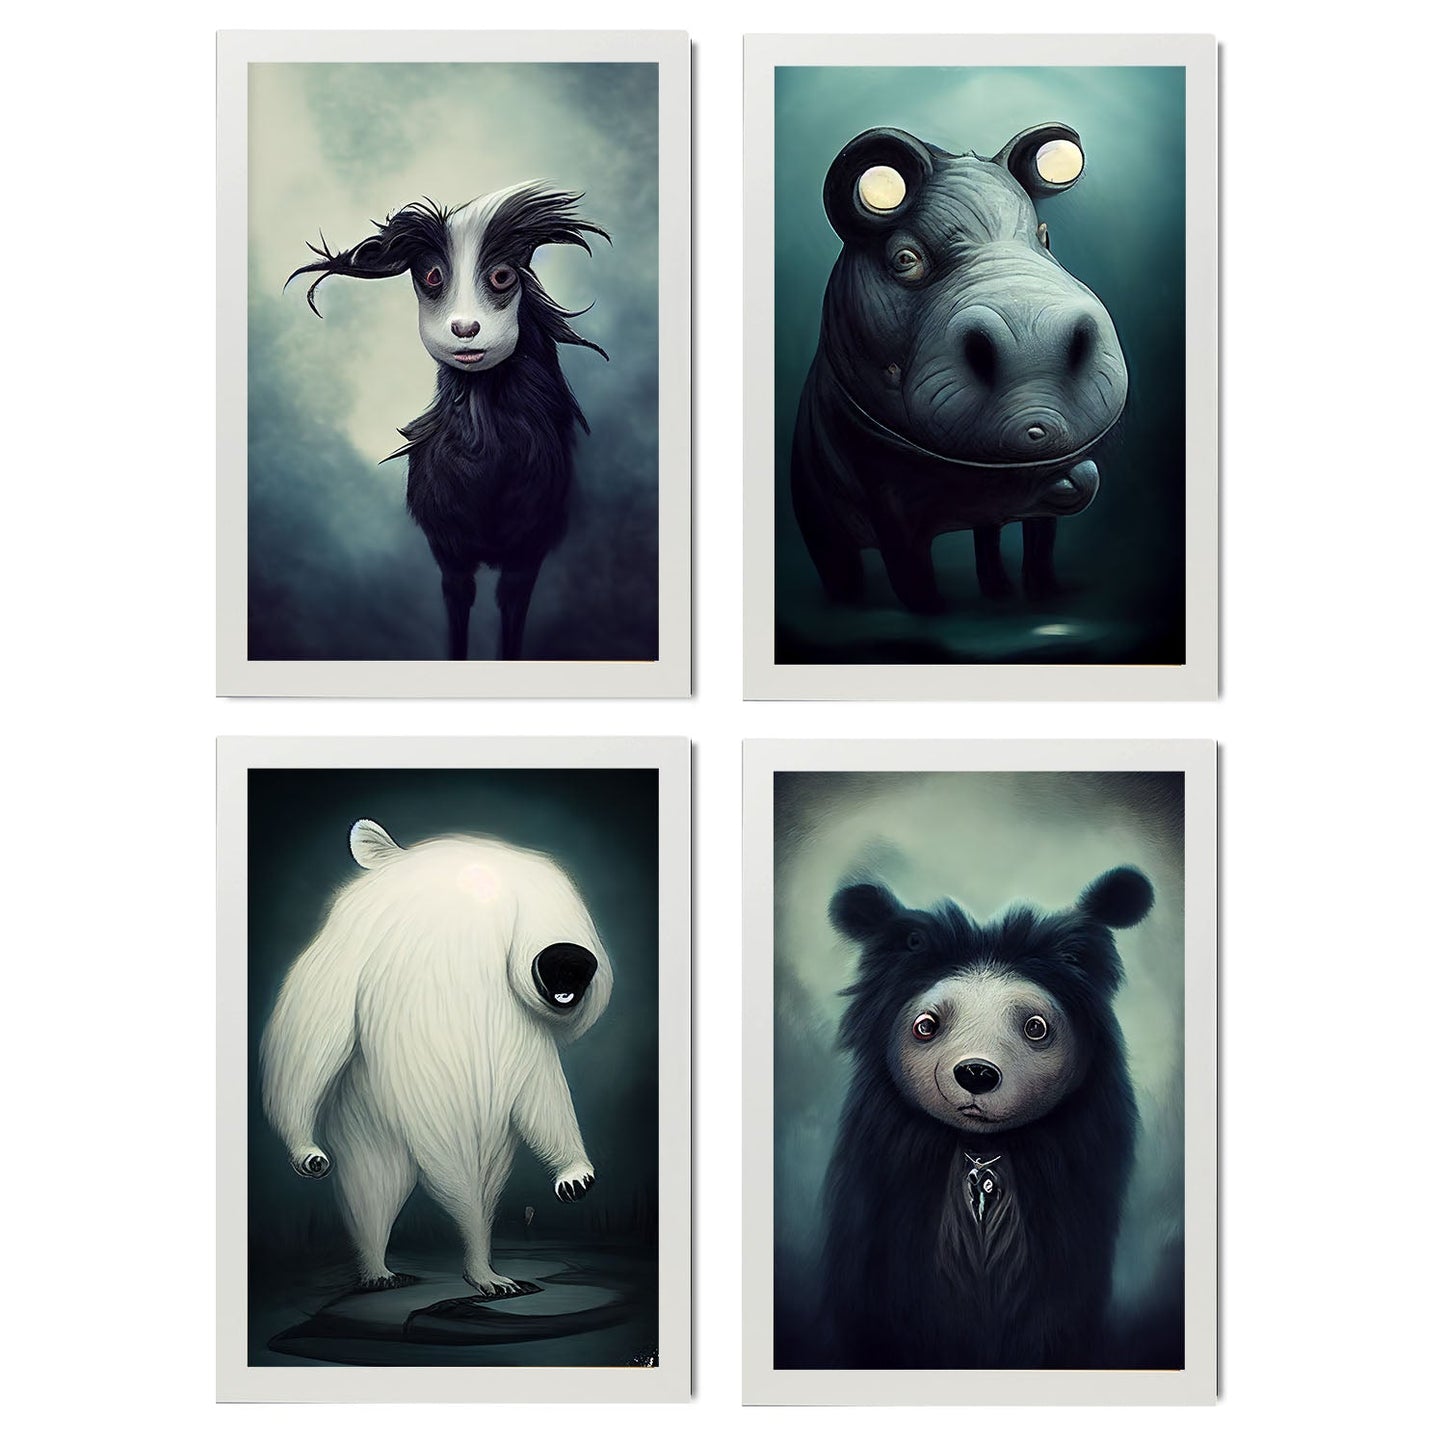 Burton style Animal Illustrations and Posters inspired by Burton's Dark and Goth art Interior Design and Decoration Set Collection 3-Artwork-Nacnic-A4-Marco Blanco-Nacnic Estudio SL